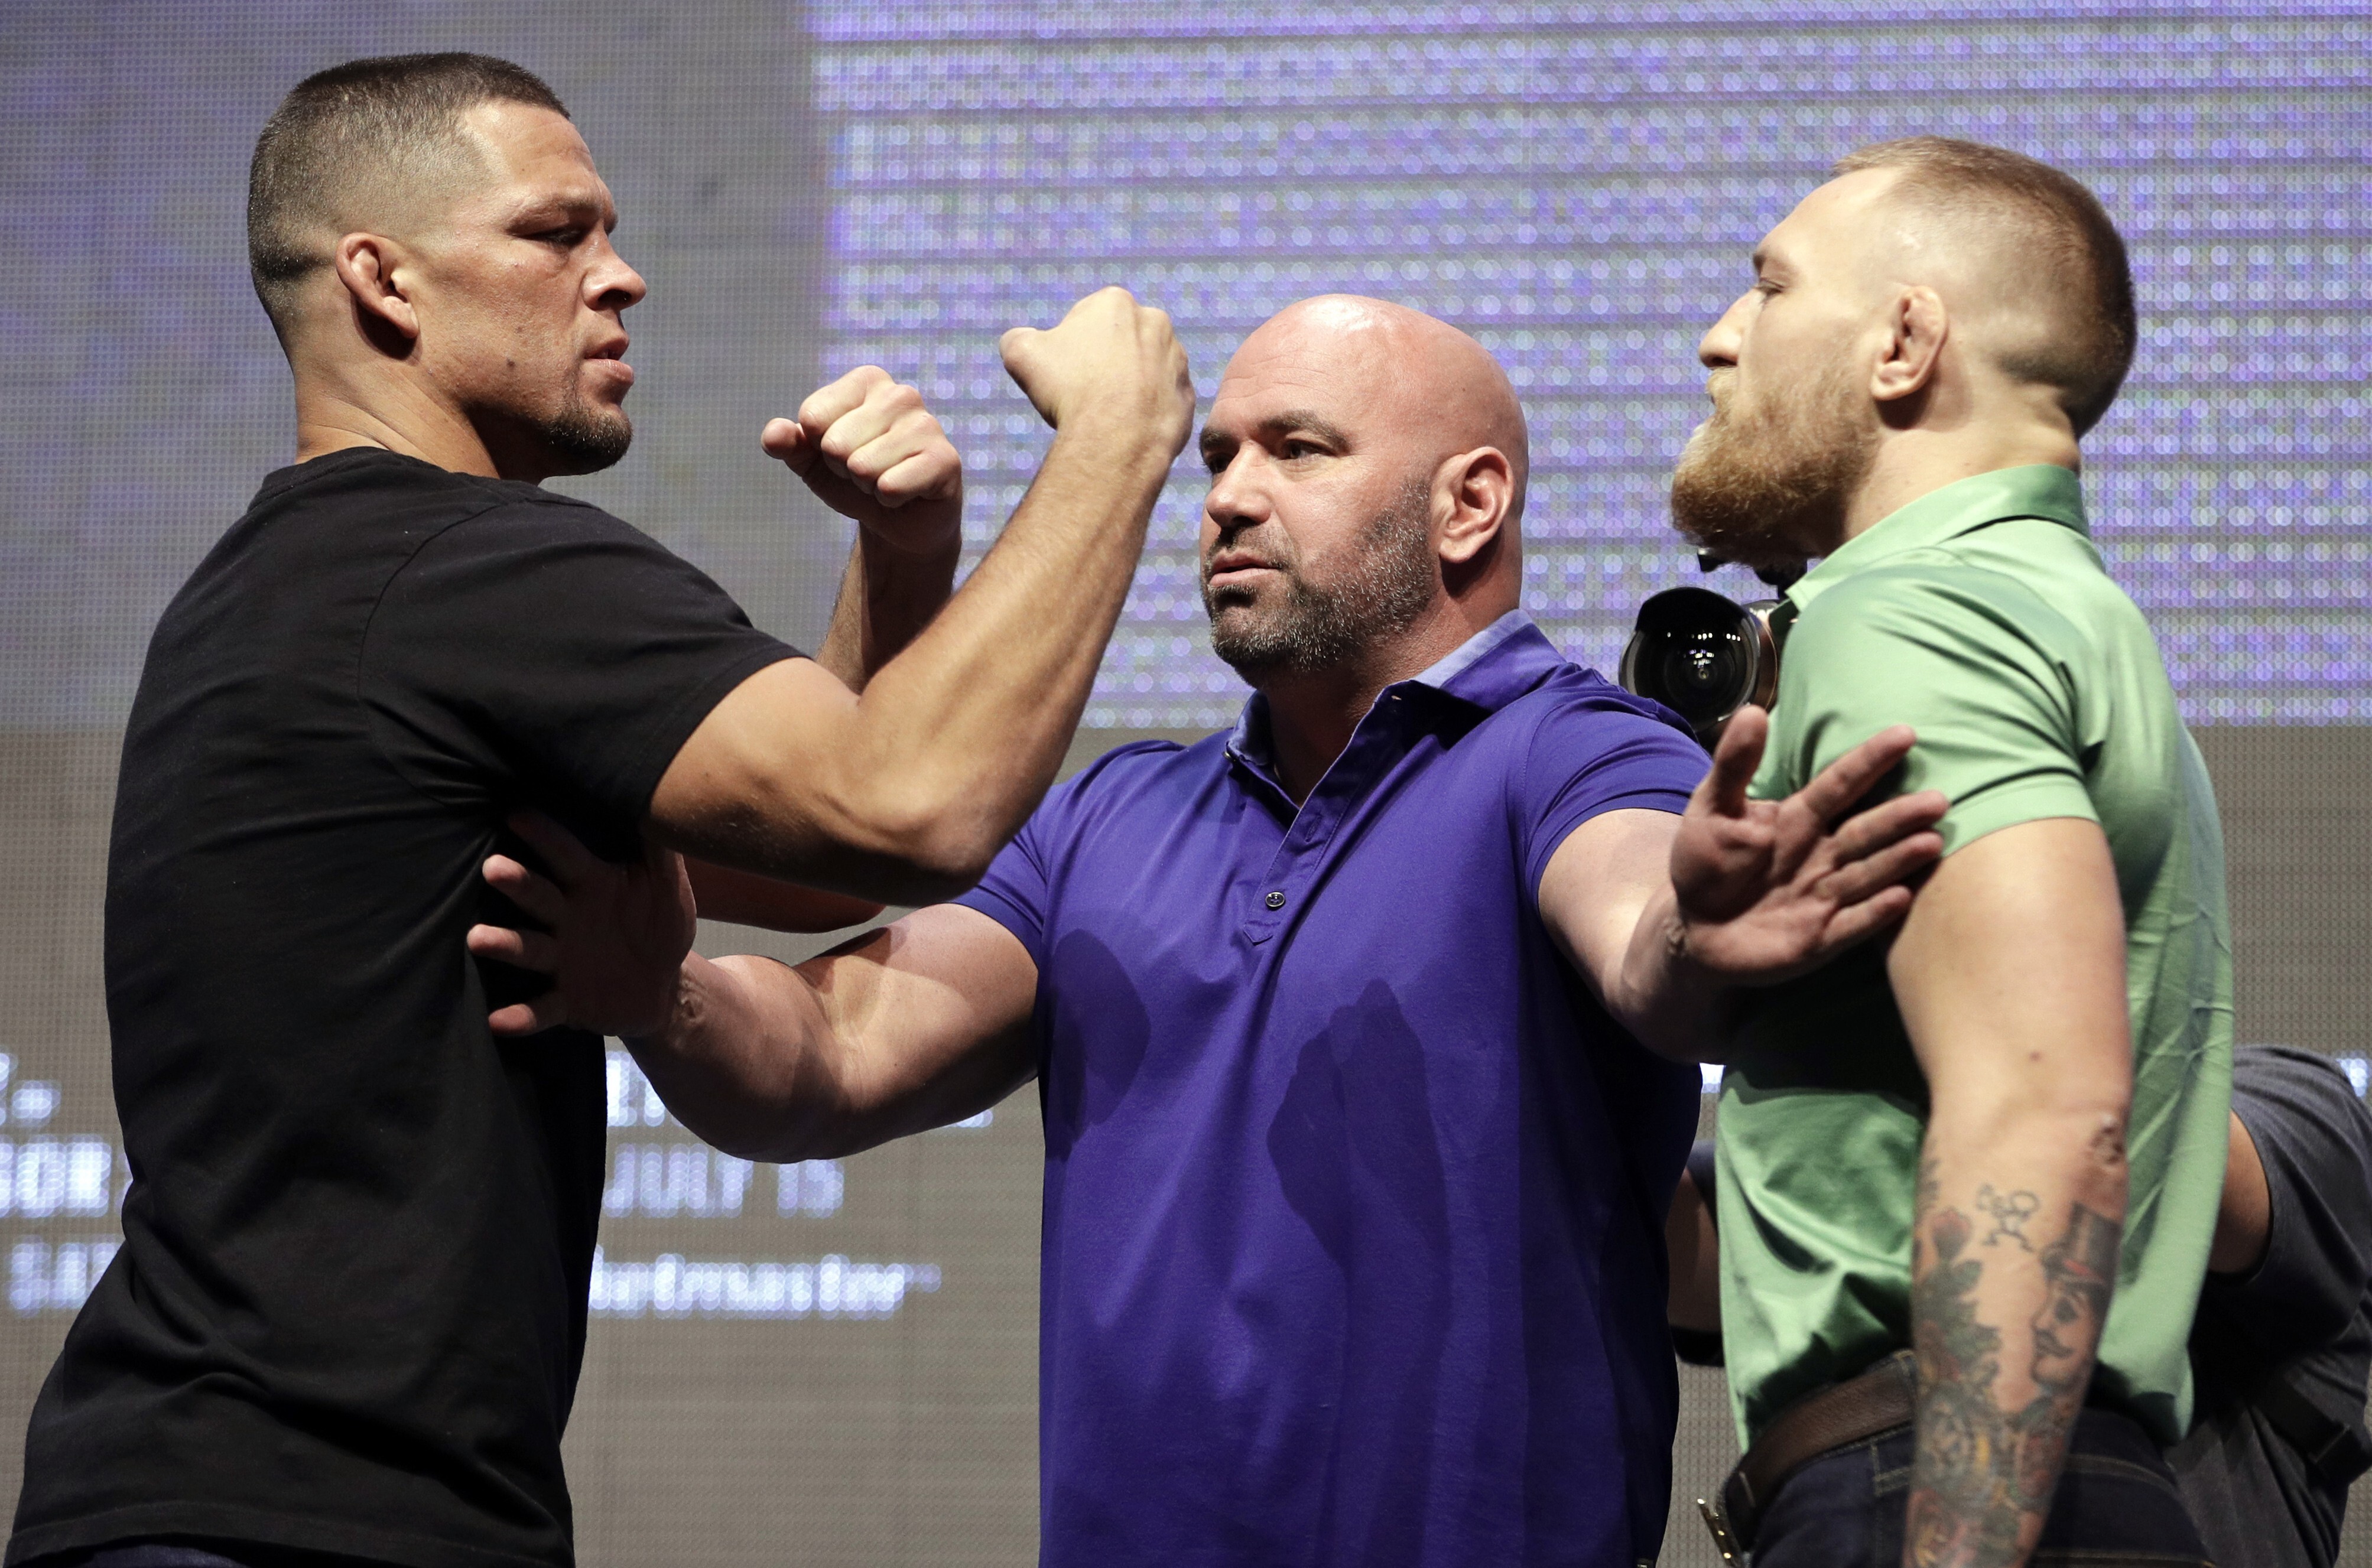 UFC president Dana White stands between Nate Diaz and Conor McGregor at a UFC 202 pre-fight press conference in Las Vegas, Nevada in 2016. Photo: AP